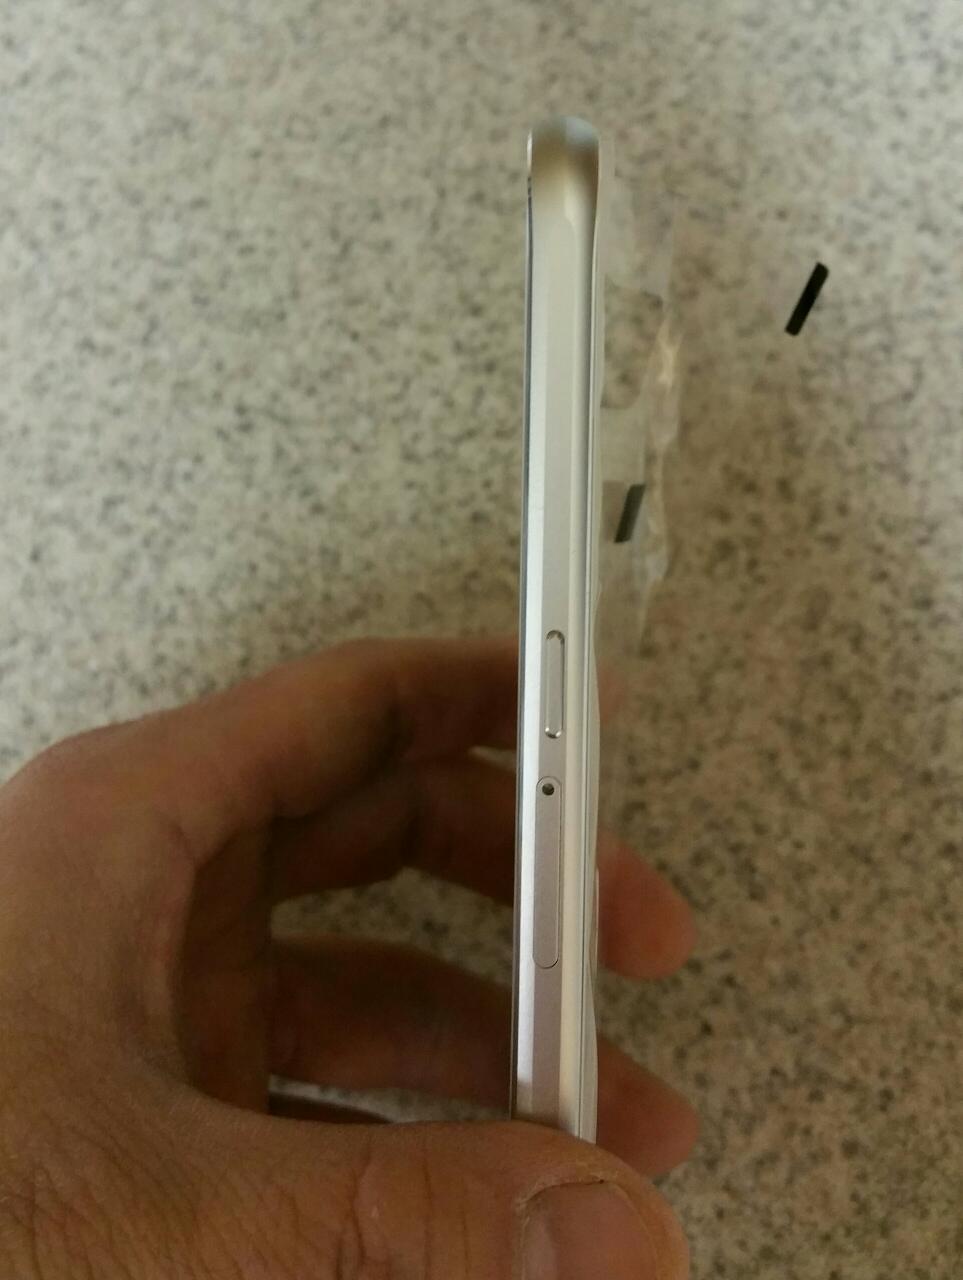 Samsung Galaxy S6 REAL IMAGES